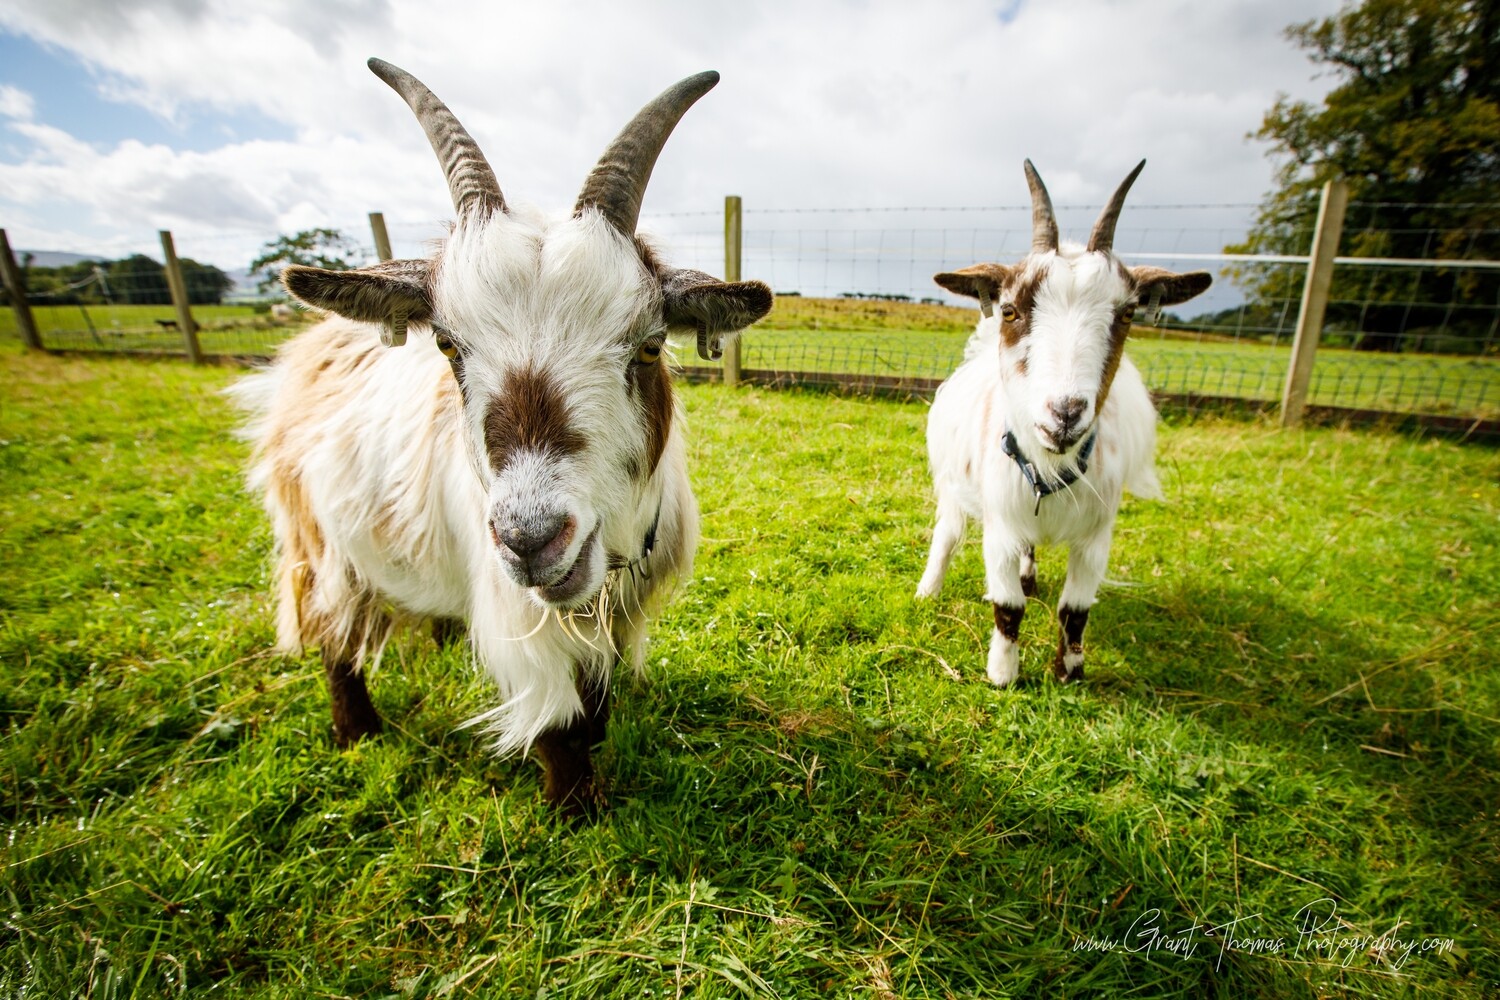 1 Full year's Goat Sponsorship Package!! Less than £1 per week! Including a VIP voucher to meet your sponsored animals!